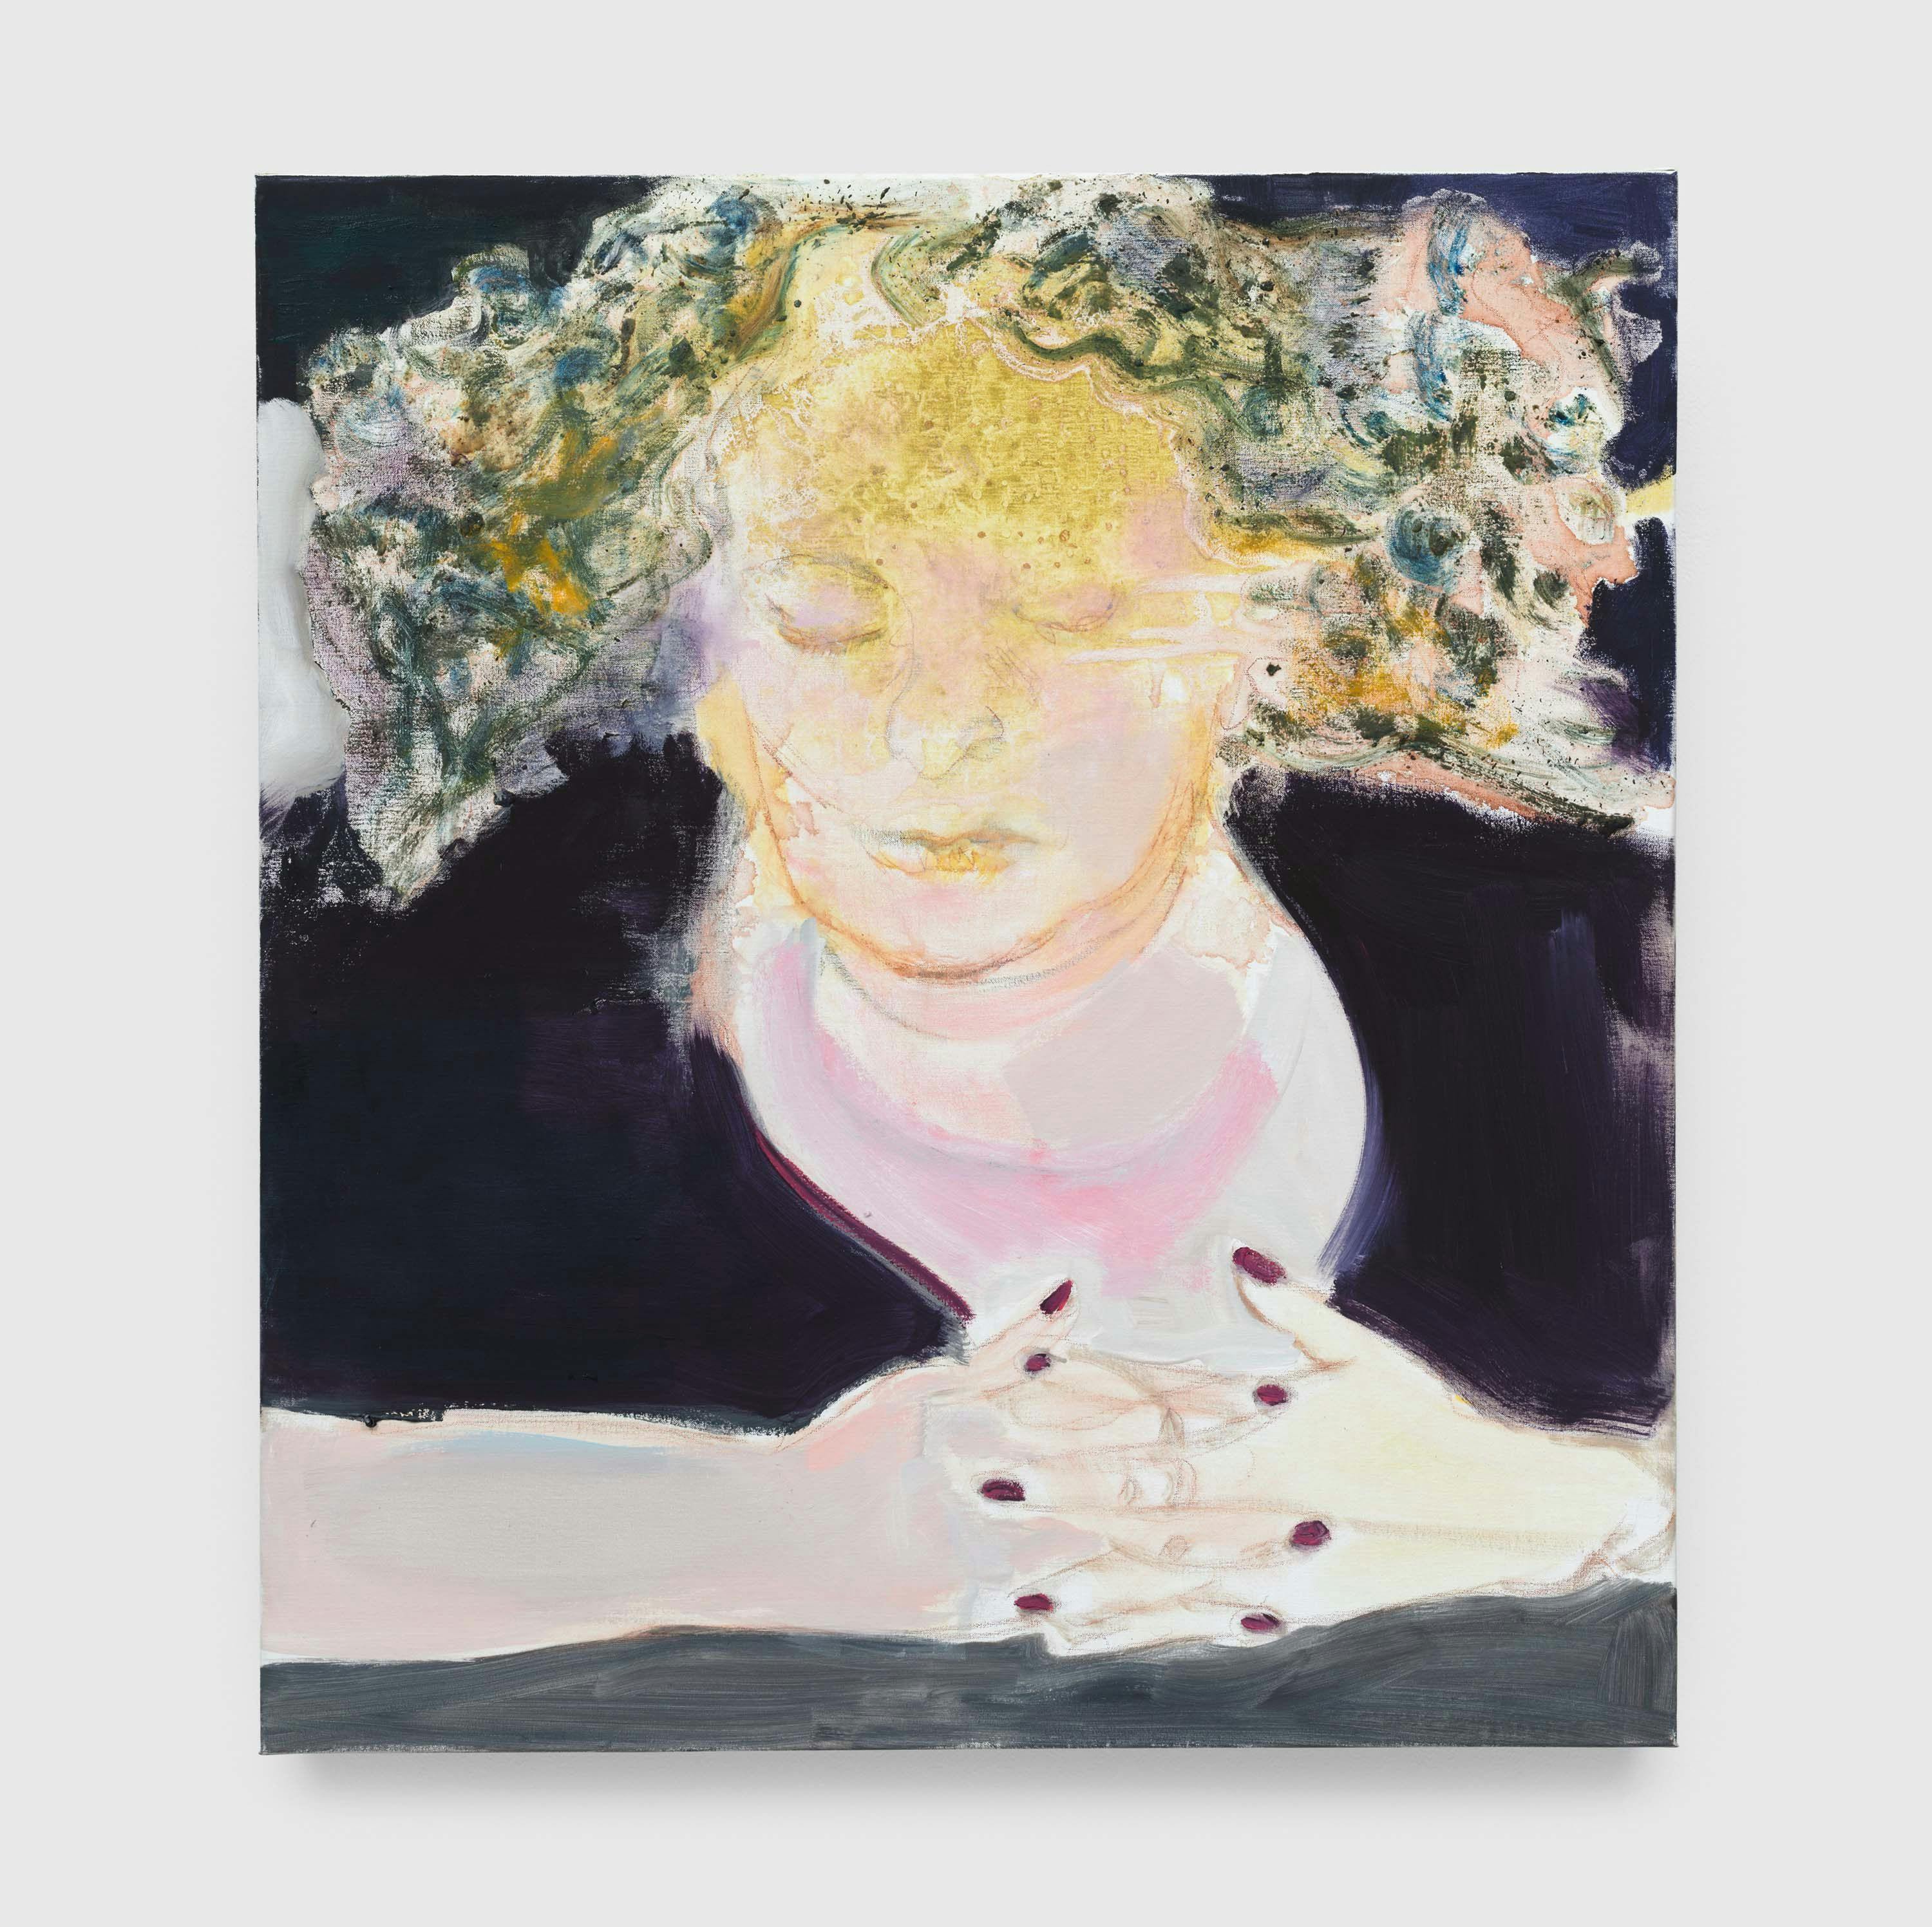 A painting by Marlene Dumas, titled The Sleep of Reason, dated 2009.